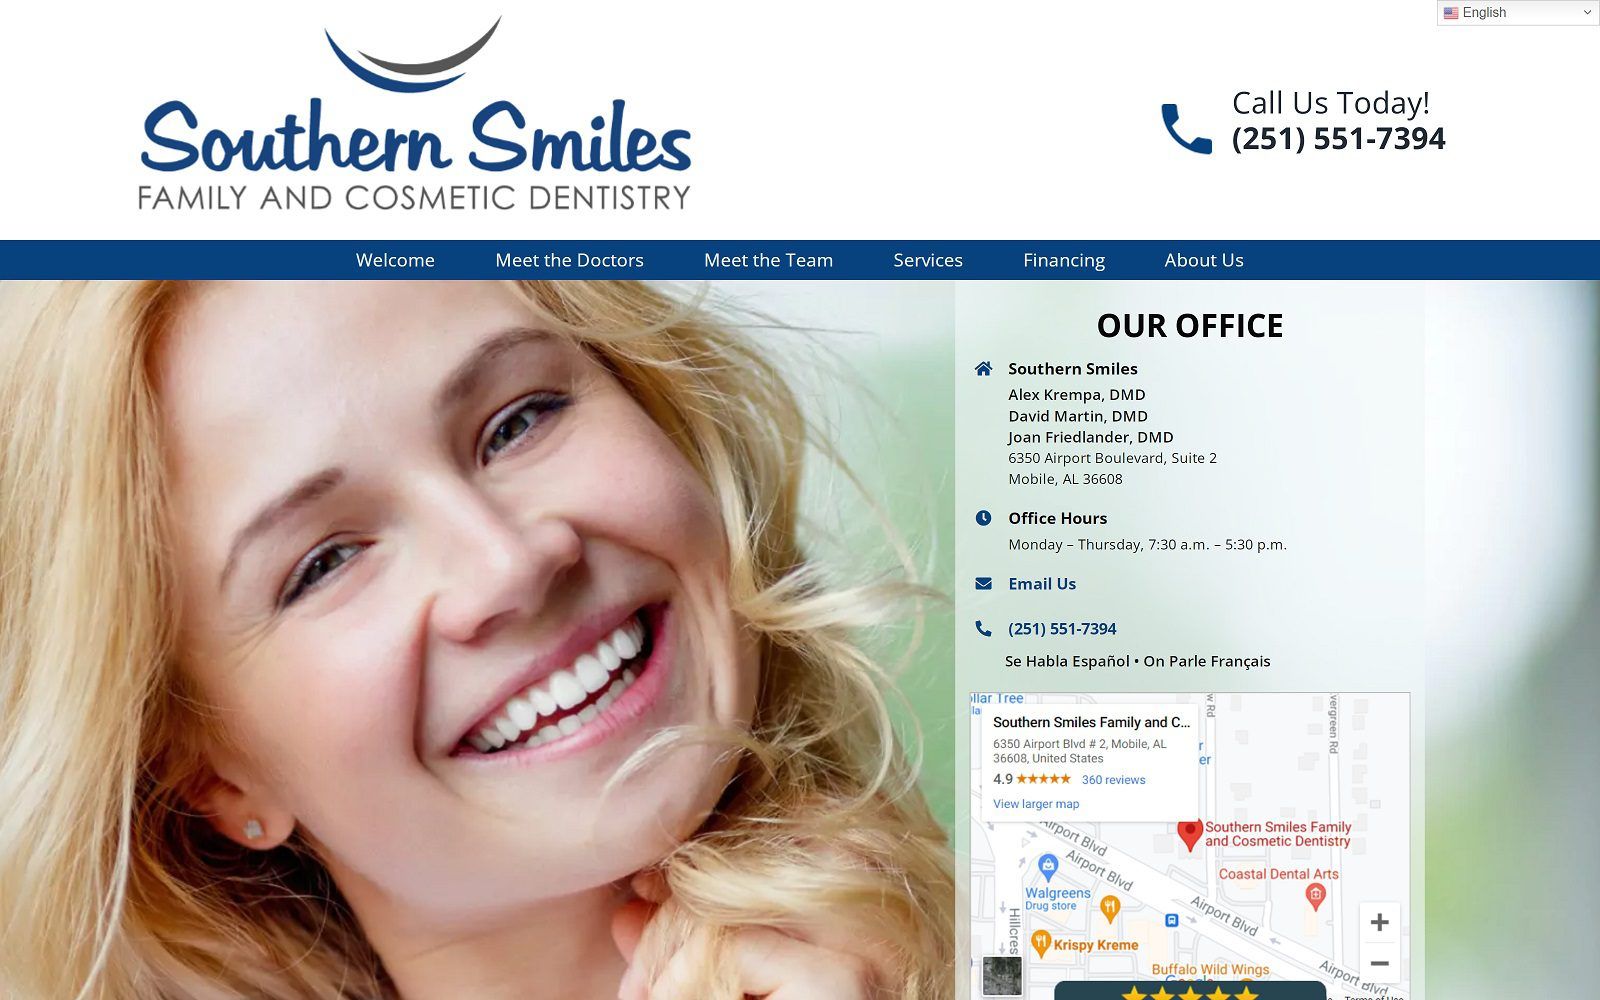 The screenshot of southern smiles family and cosmetic dentistry website